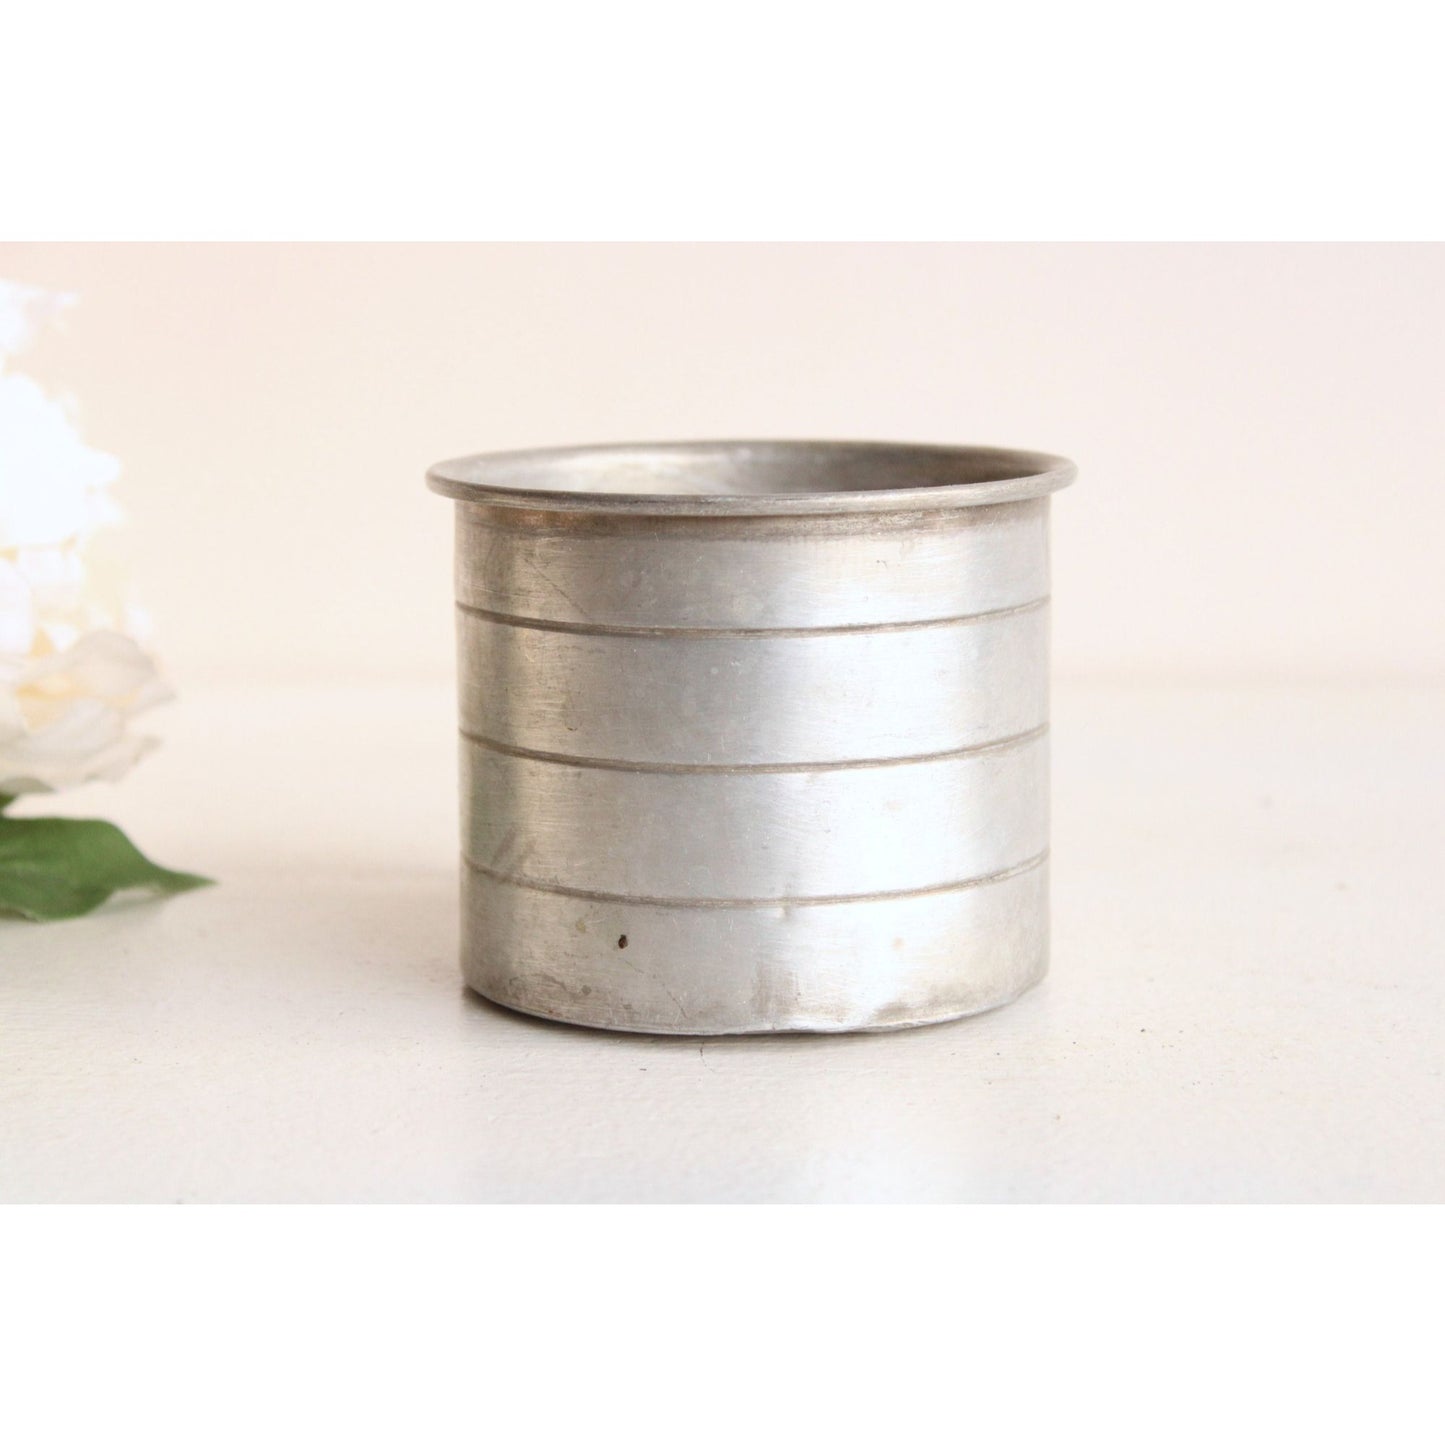 Vintage 1950s Aluminum Two Cup Measuring Cup